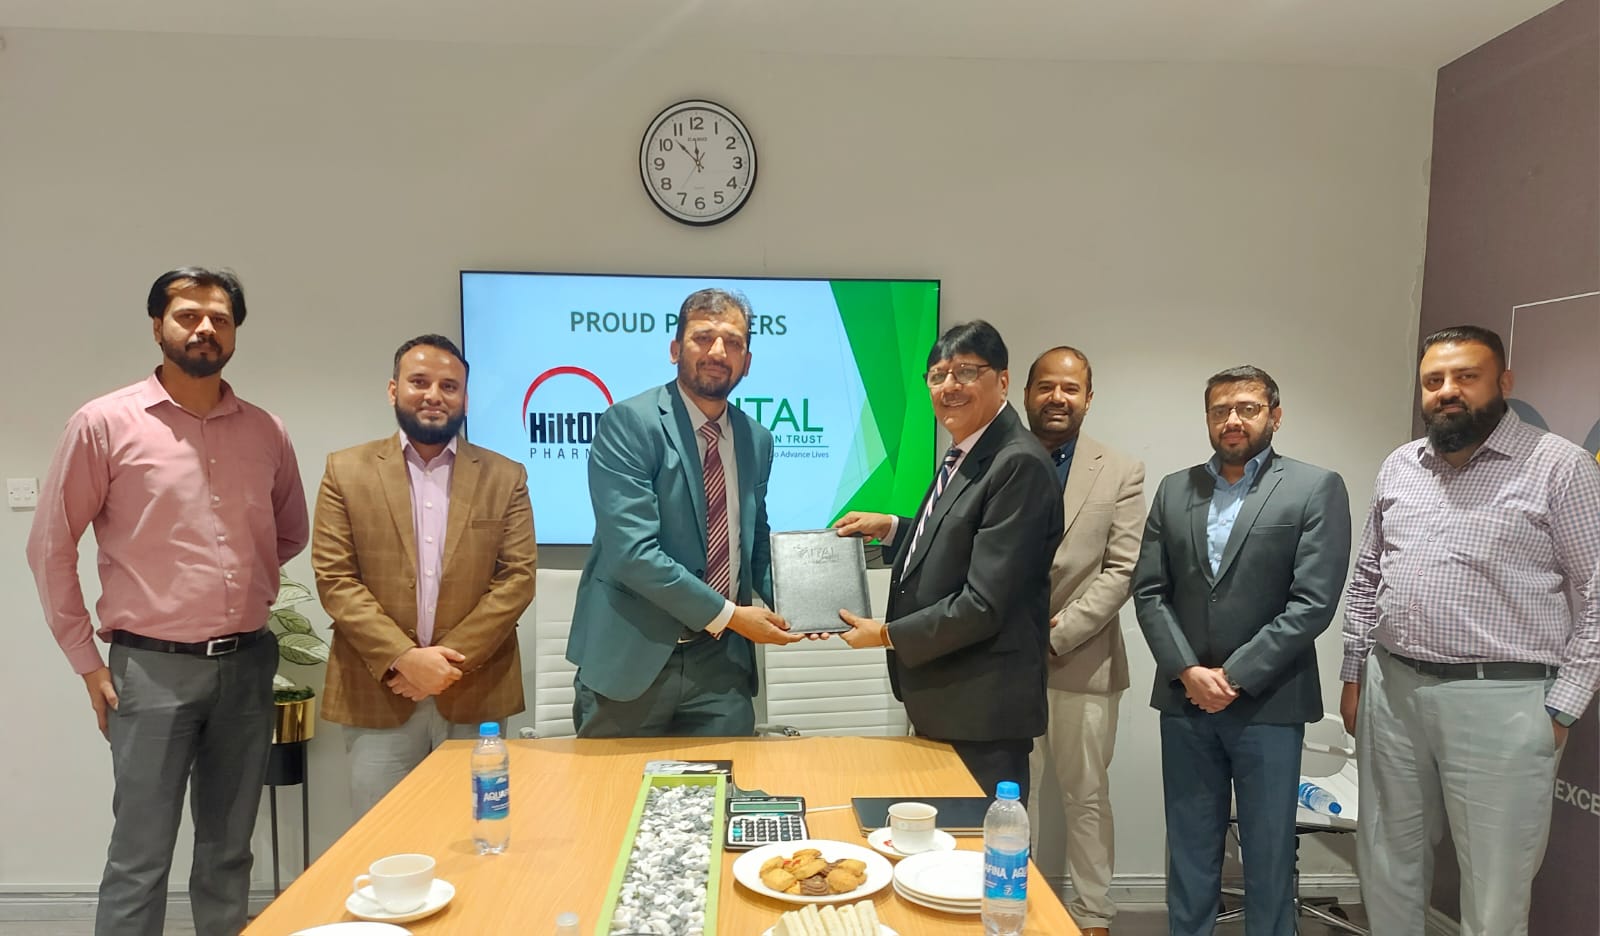 Hilton Pharma and Vital Pakistan Trust Join Forces for Women and Children’s Healthcare in Karachi